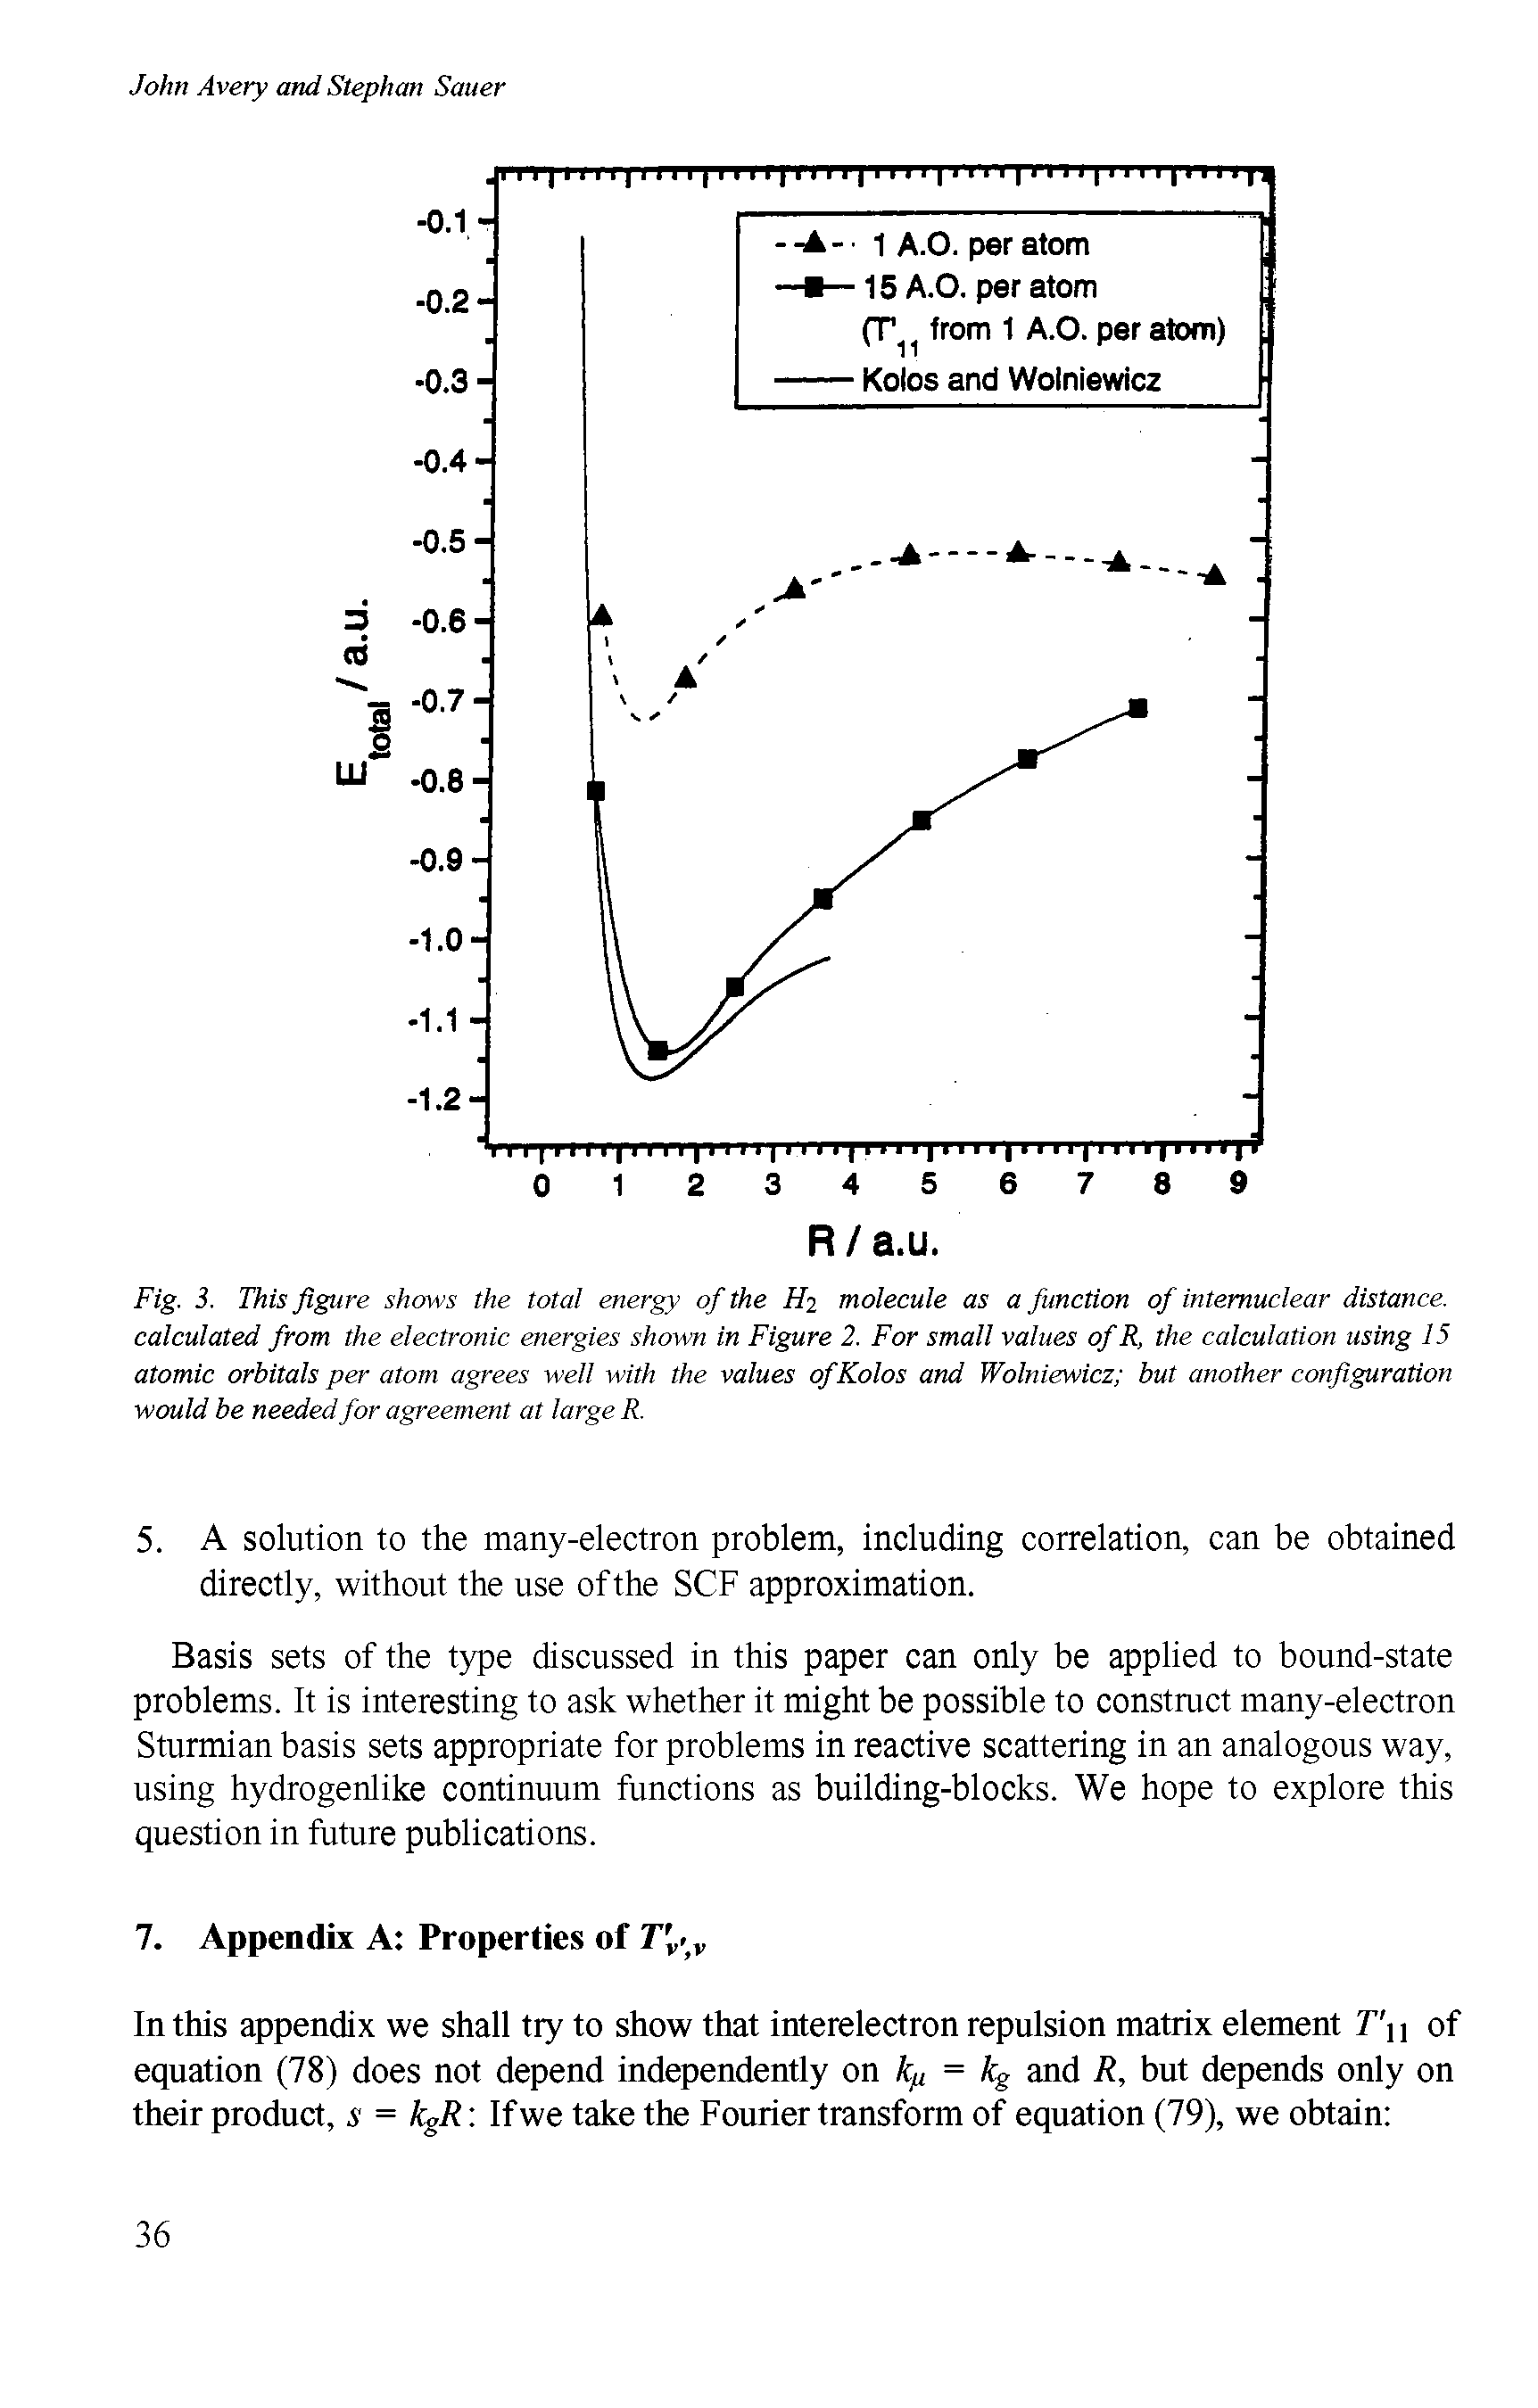 Fig. 3. This figure shows the total energy of the H2 molecule as a function of intemuclear distance, calculated from the electronic energies shown in Figure 2. For small values of R, the calculation using 15 atomic orbitals per atom agrees well with the values of Kolos and Wolniewicz but another configuration would be needed for agreement at large R.